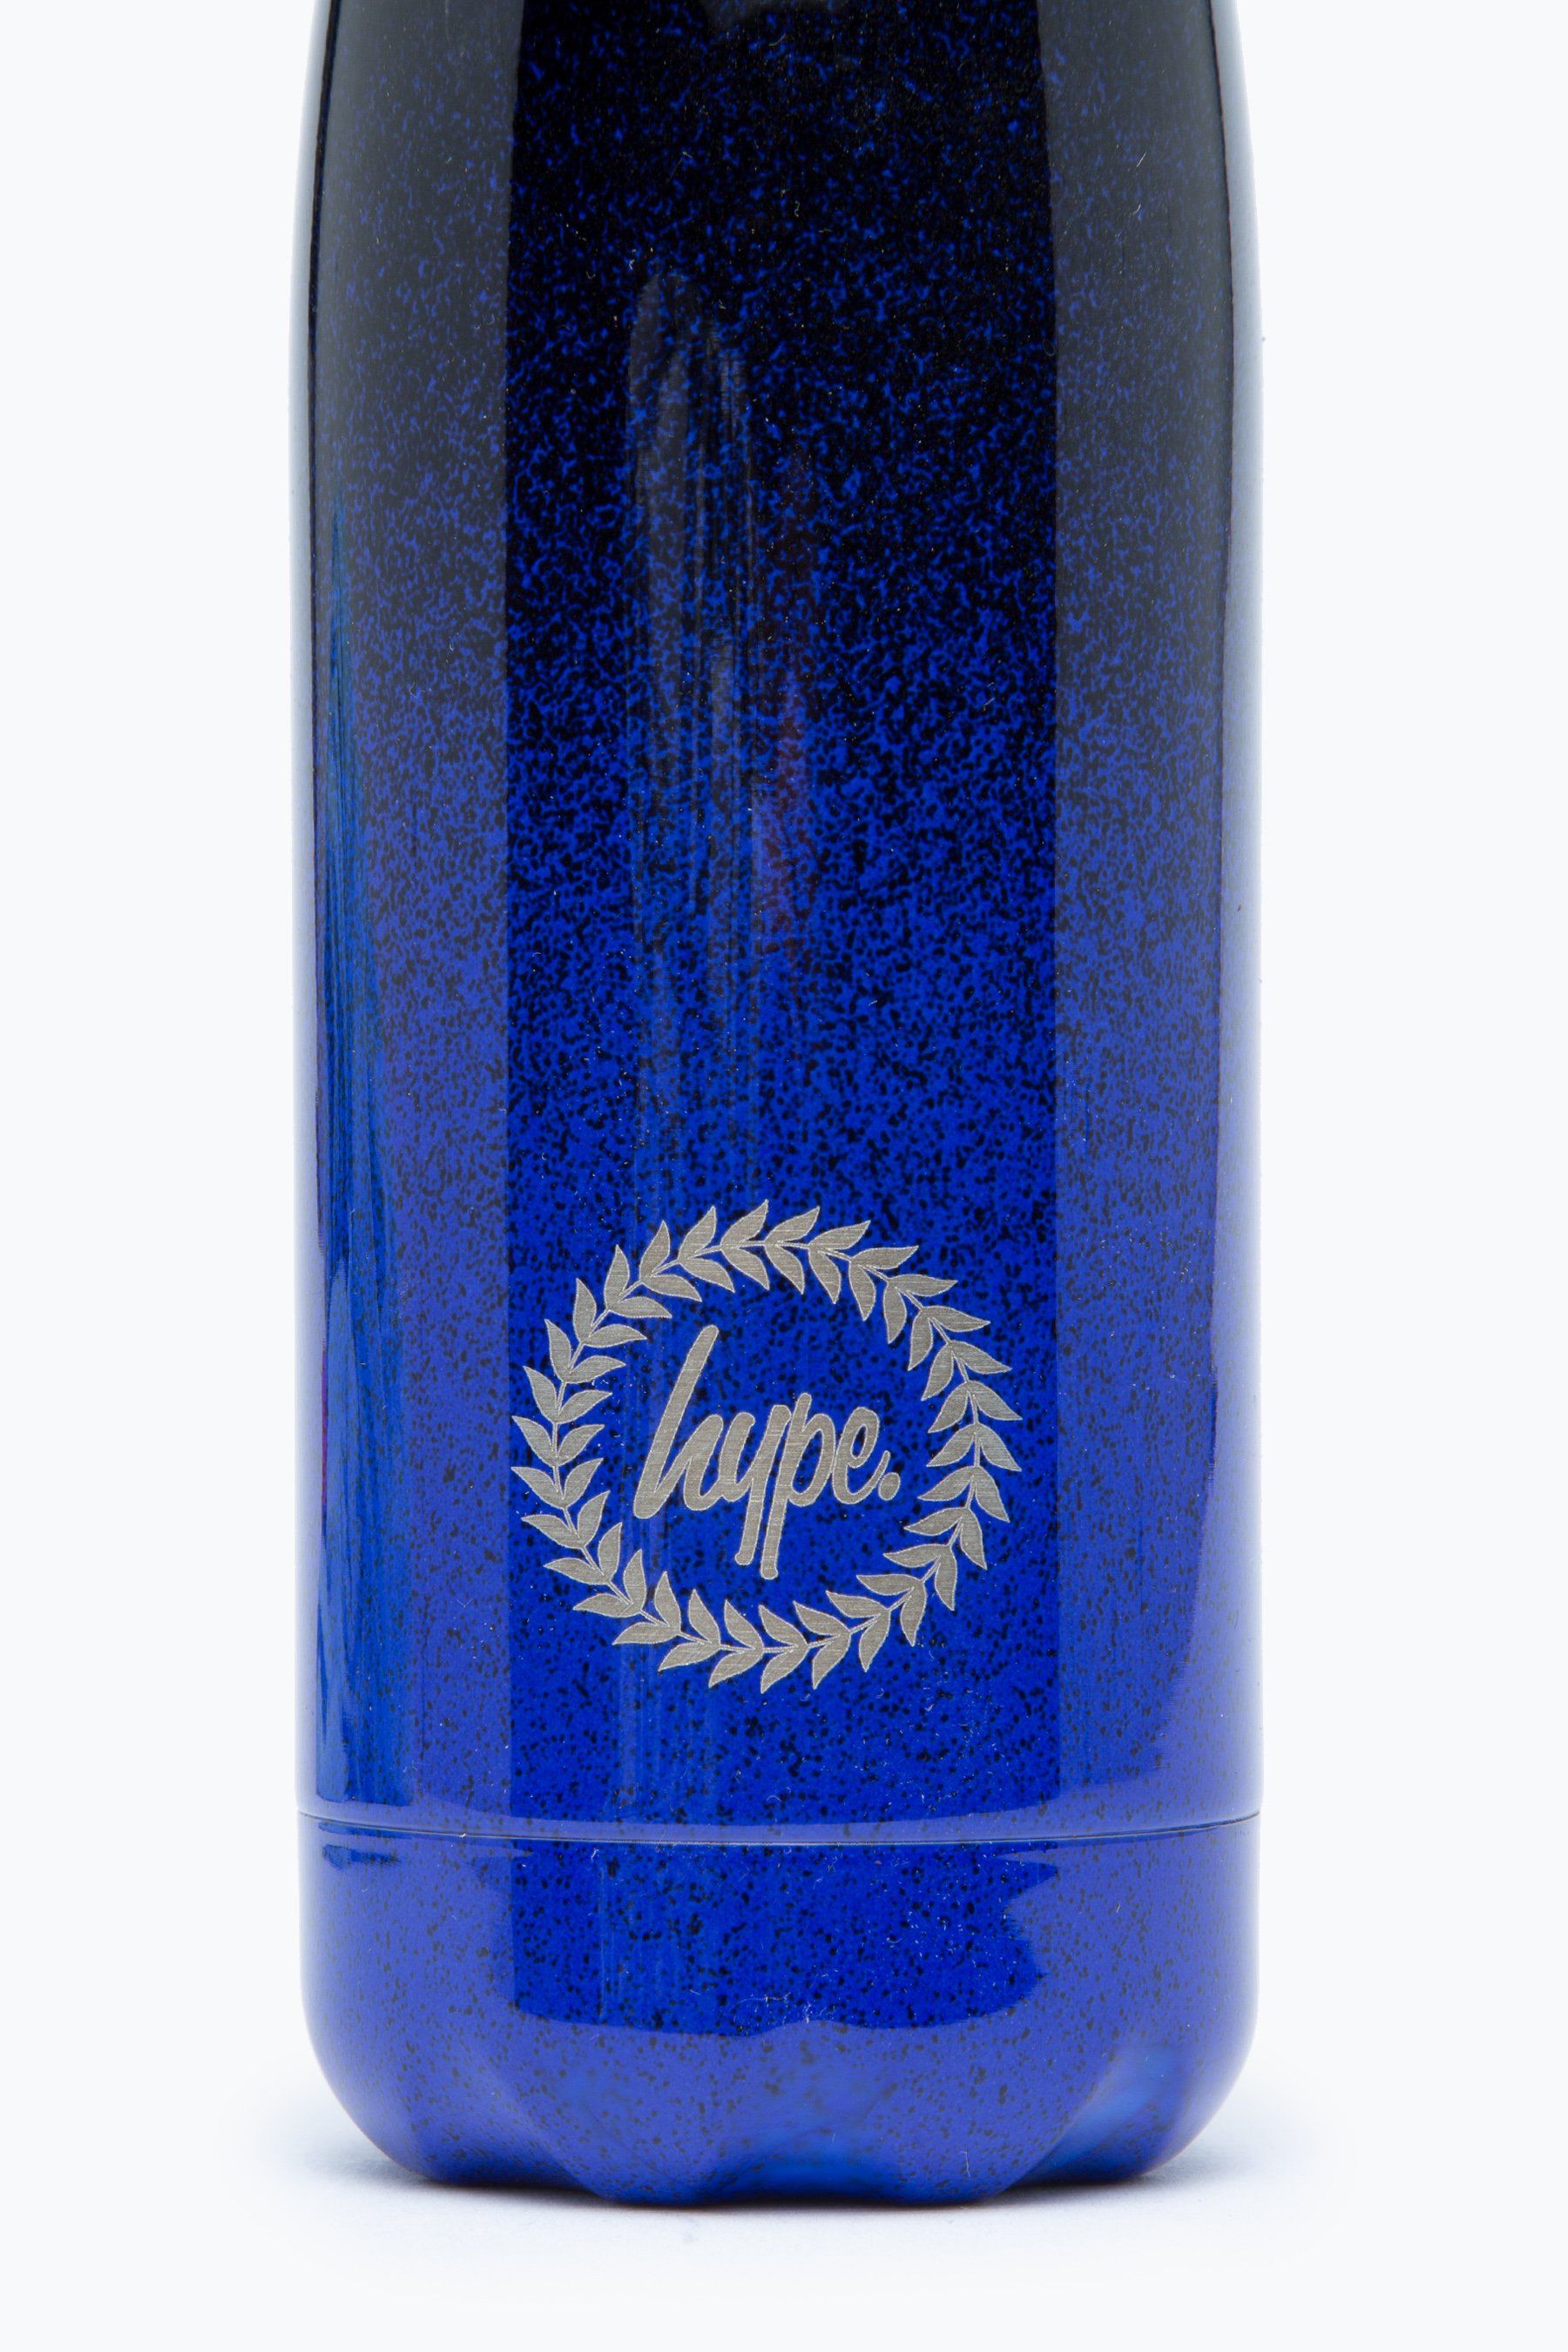 Keeping you hydrated, in style. Meet the HYPE. Blue Black Speckle Metal Reusable Water Bottle, perfect for when you're on the go. With our iconic speckle print in a contrasting white all-over the bottle. Designed in Aluminium to ensure your water stays ice-cold and for chillier days, keeping your oat milk latte warm for longer. Reuse it again and again with an airtight screw lid prevents spills. With an all-over graffiti paint speckle effect in a blue and black colour palette. Why not grab one of our lunch bags or backpacks with a bottle holder to complete the look. Hand wash only.